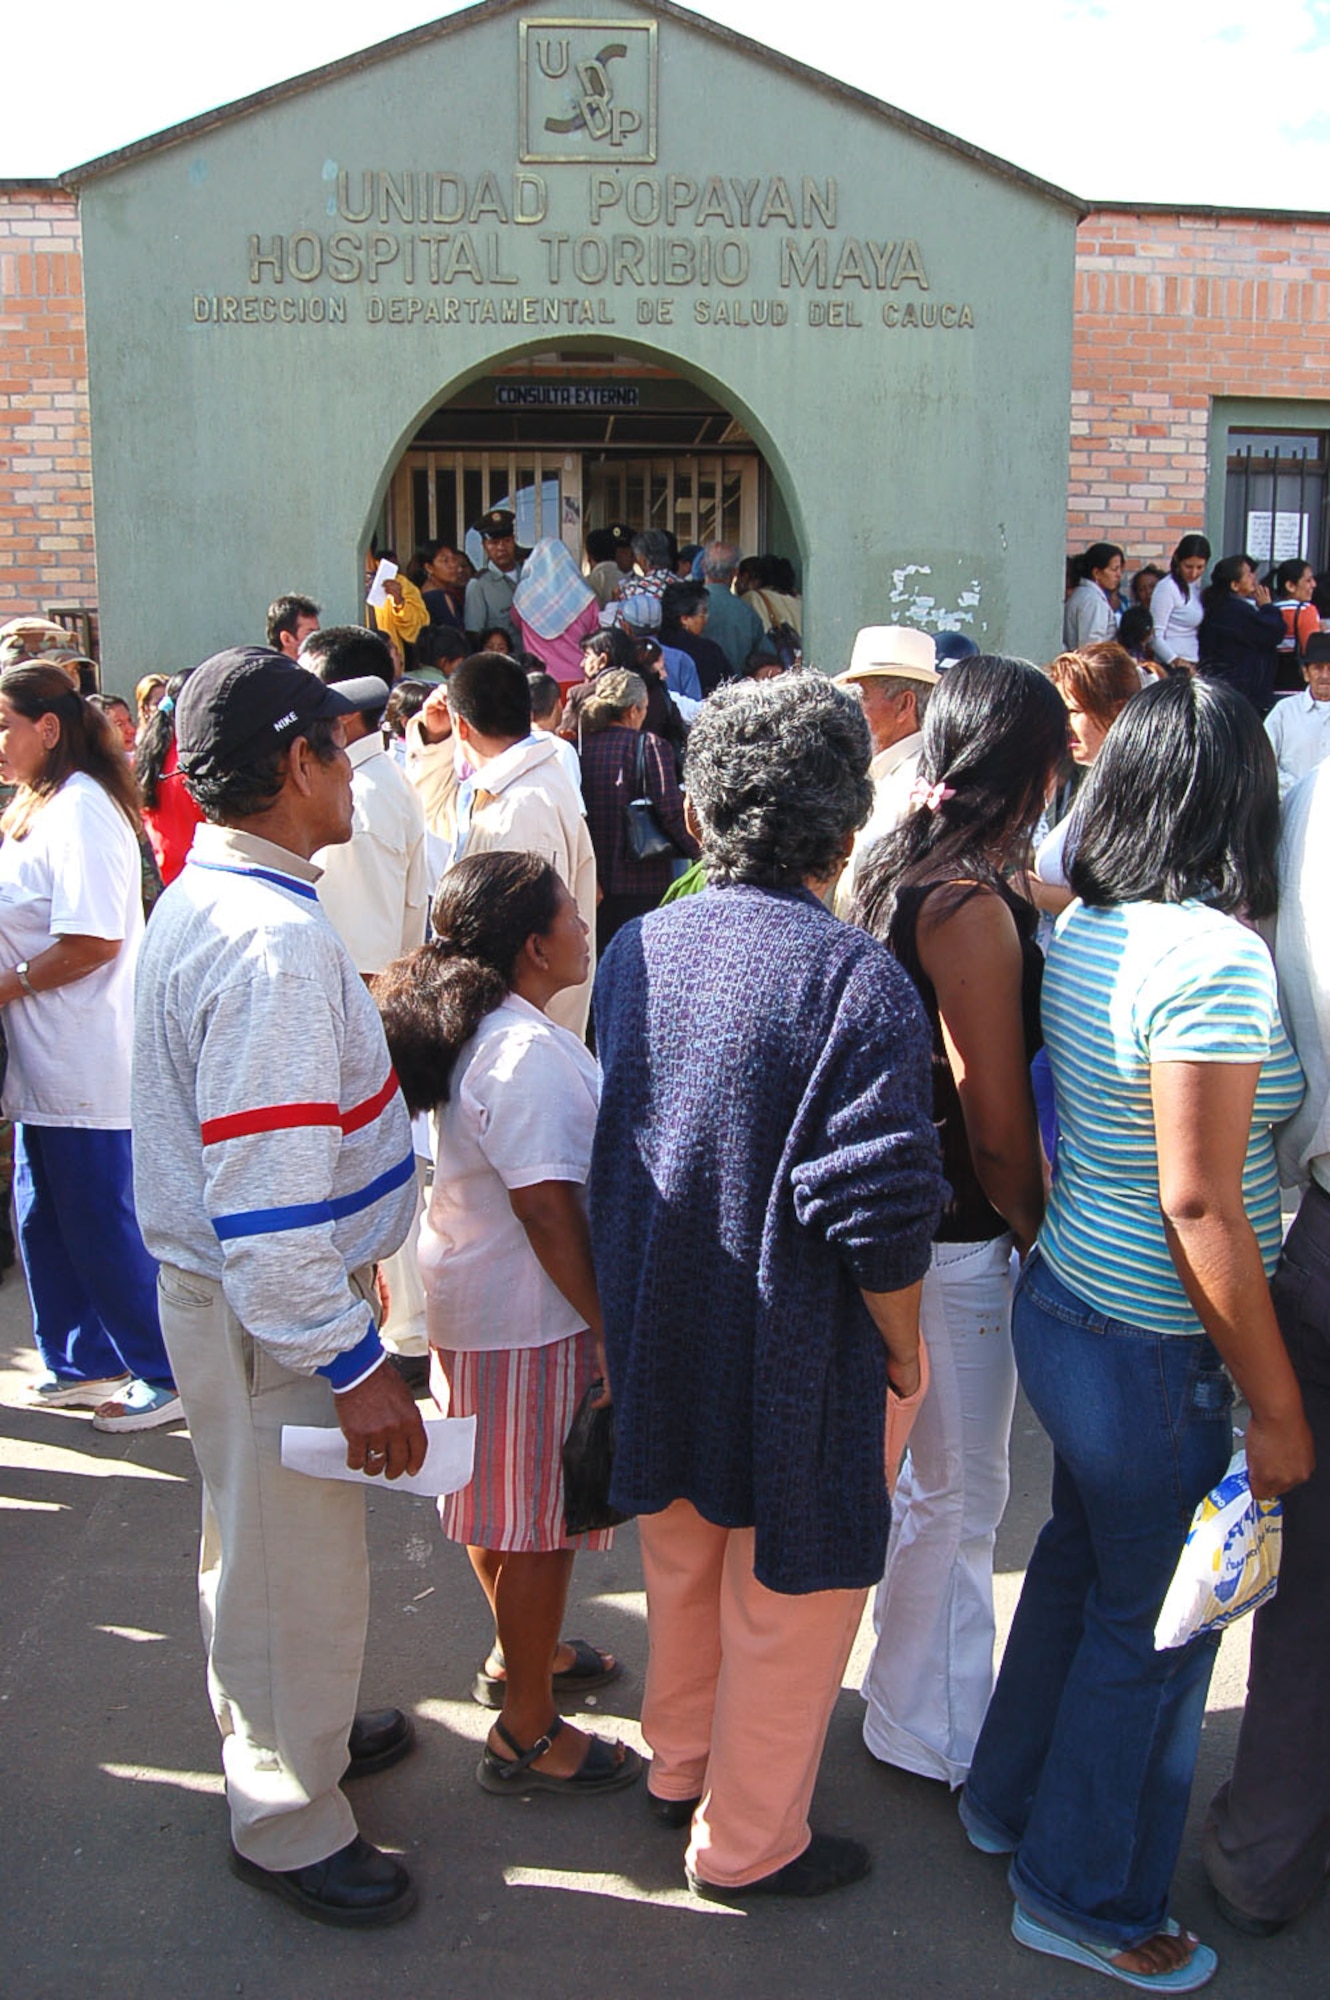 People gather outside the Hospital Toribo Maya in Popayan, Colombia, Sept. 12 to receive treatment from a U.S. medical team performing a medical readiness training exercise. (U.S. Air Force photo/Staff Sgt. Matthew Bates) 

